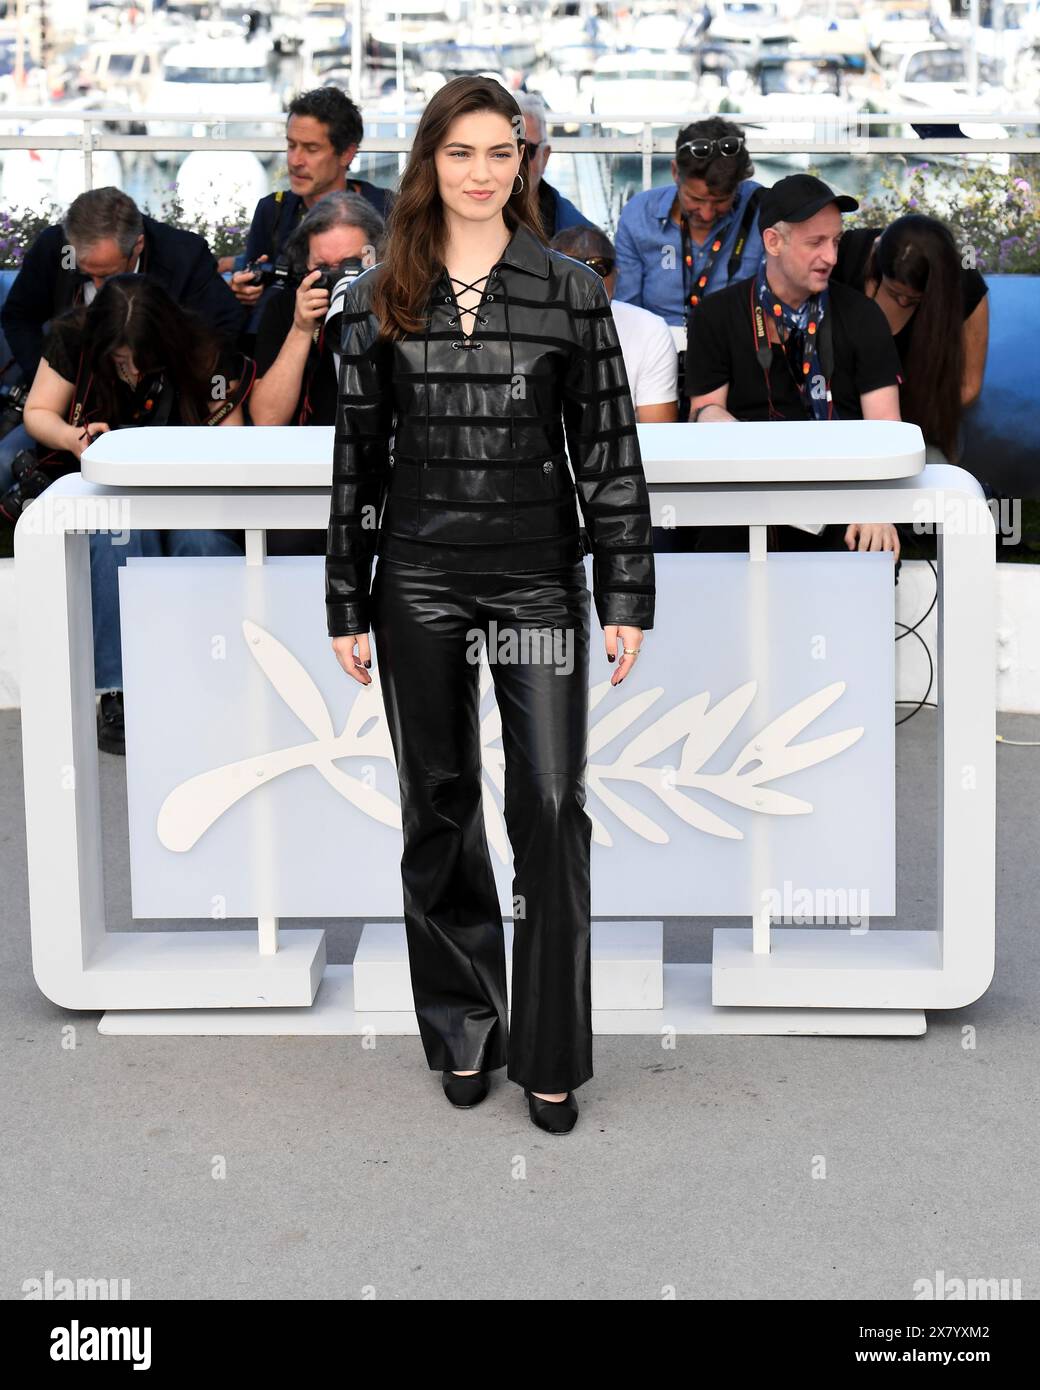 Cannes, Frankreich. Mai 2024. Cannes, 77. Cannes Filmfestival 2024 Fotocall Film 'Maria' im Foto: Matt Dillon Credit: Independent Photo Agency/Alamy Live News Stockfoto